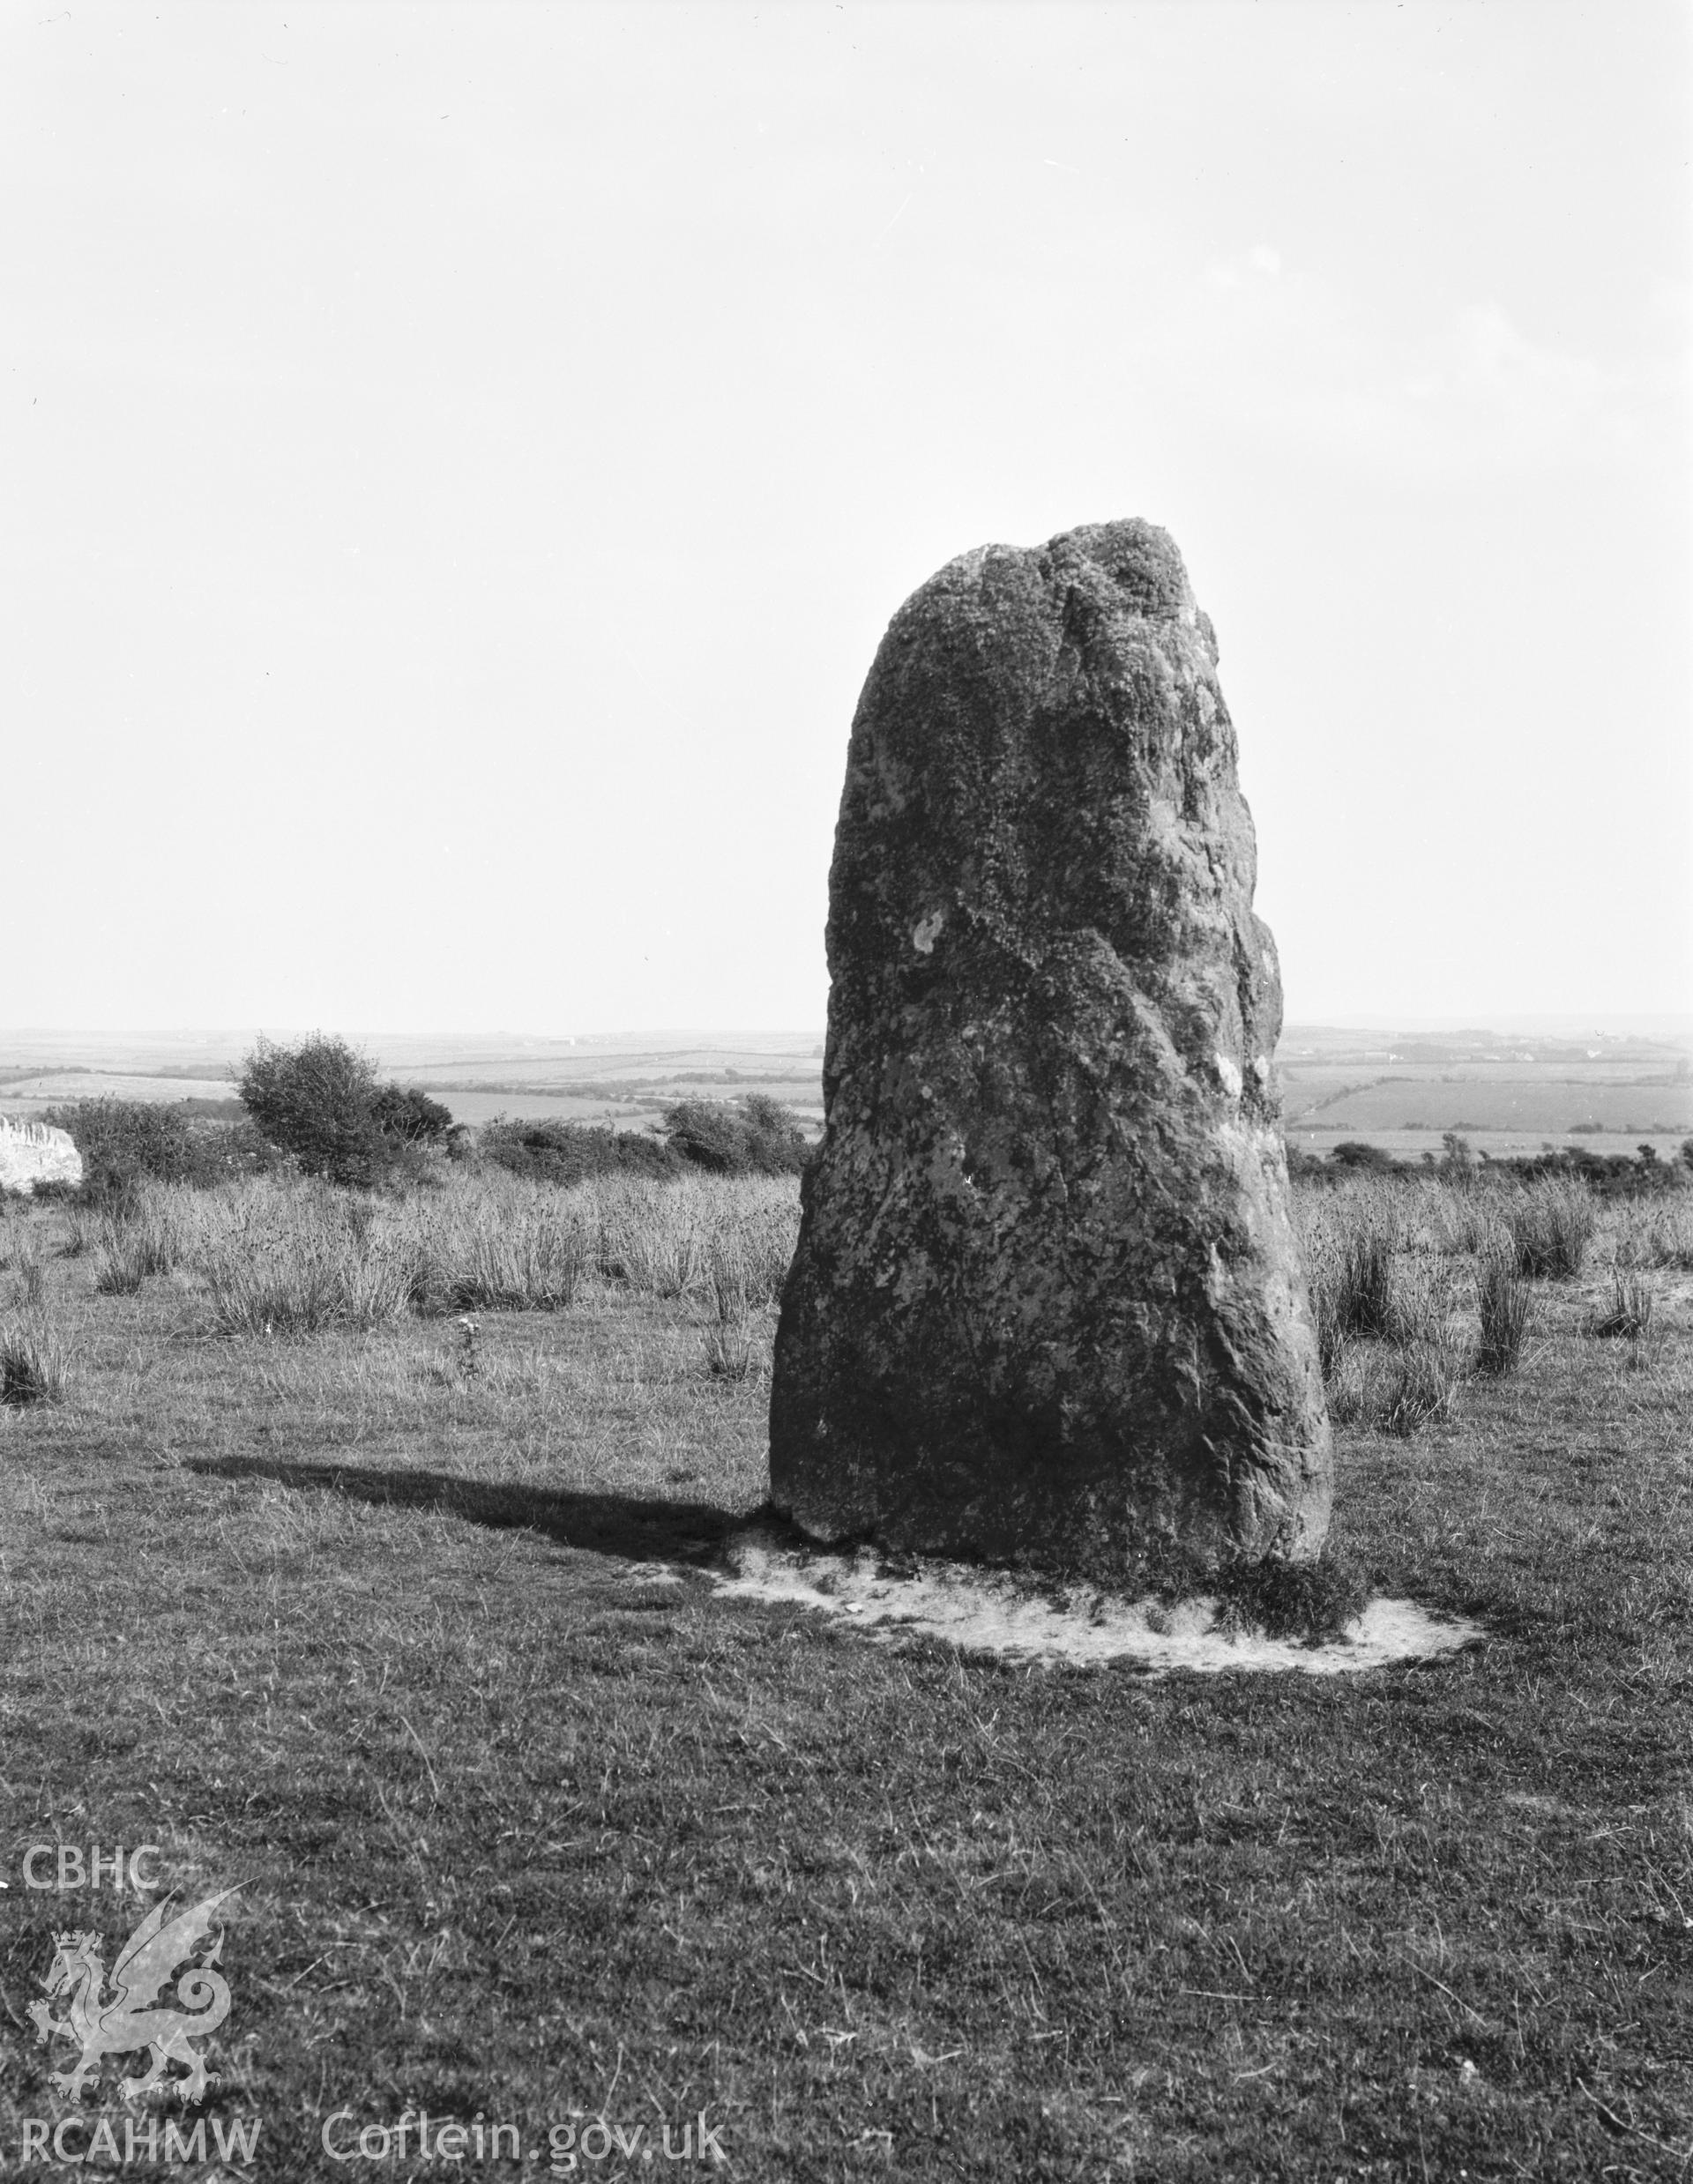 Black and white photograph showing the standing stone, taken by RCAHMW before 1960.